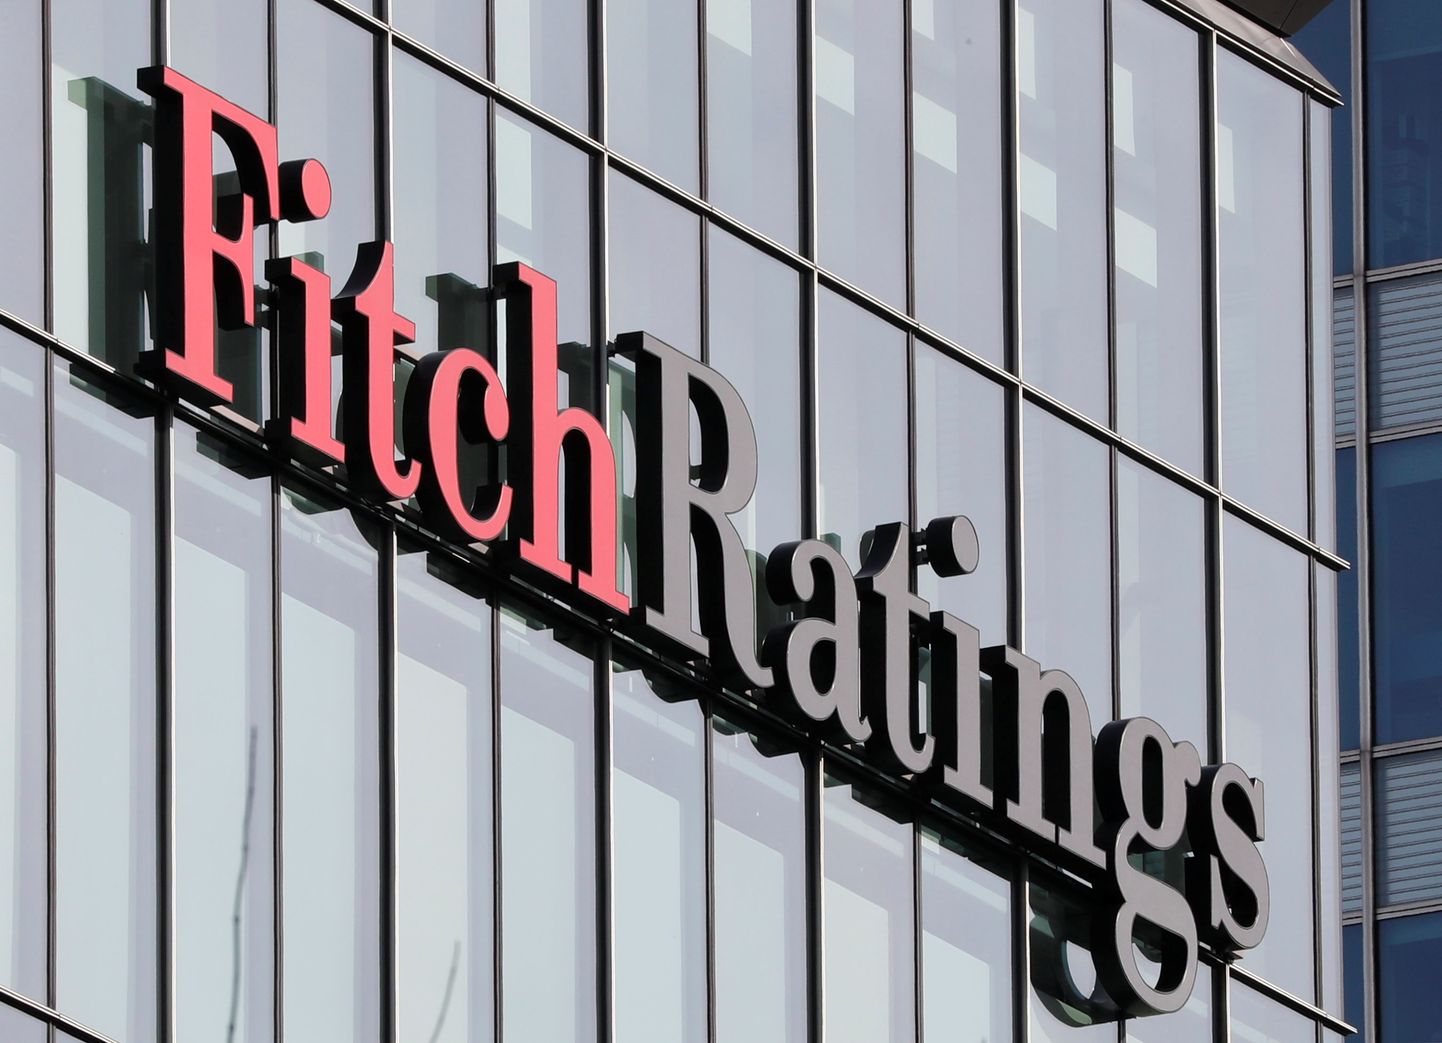 Fitch Ratings.